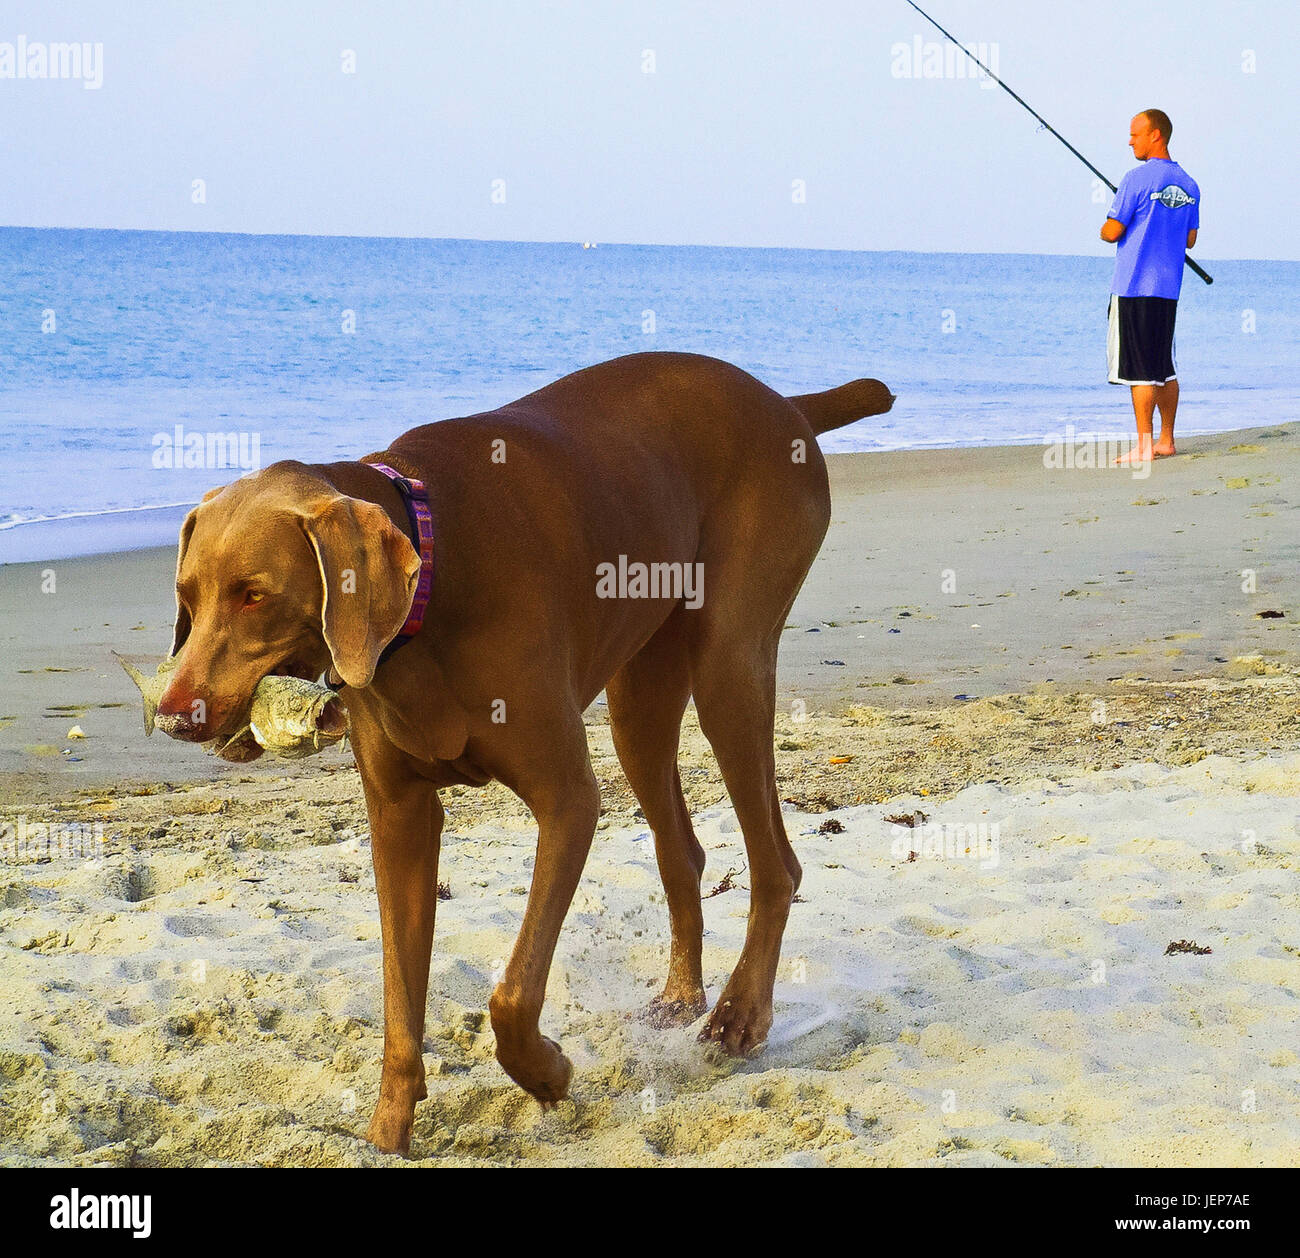 Man fishing and Dog with fish in mouth at beach Stock Photo